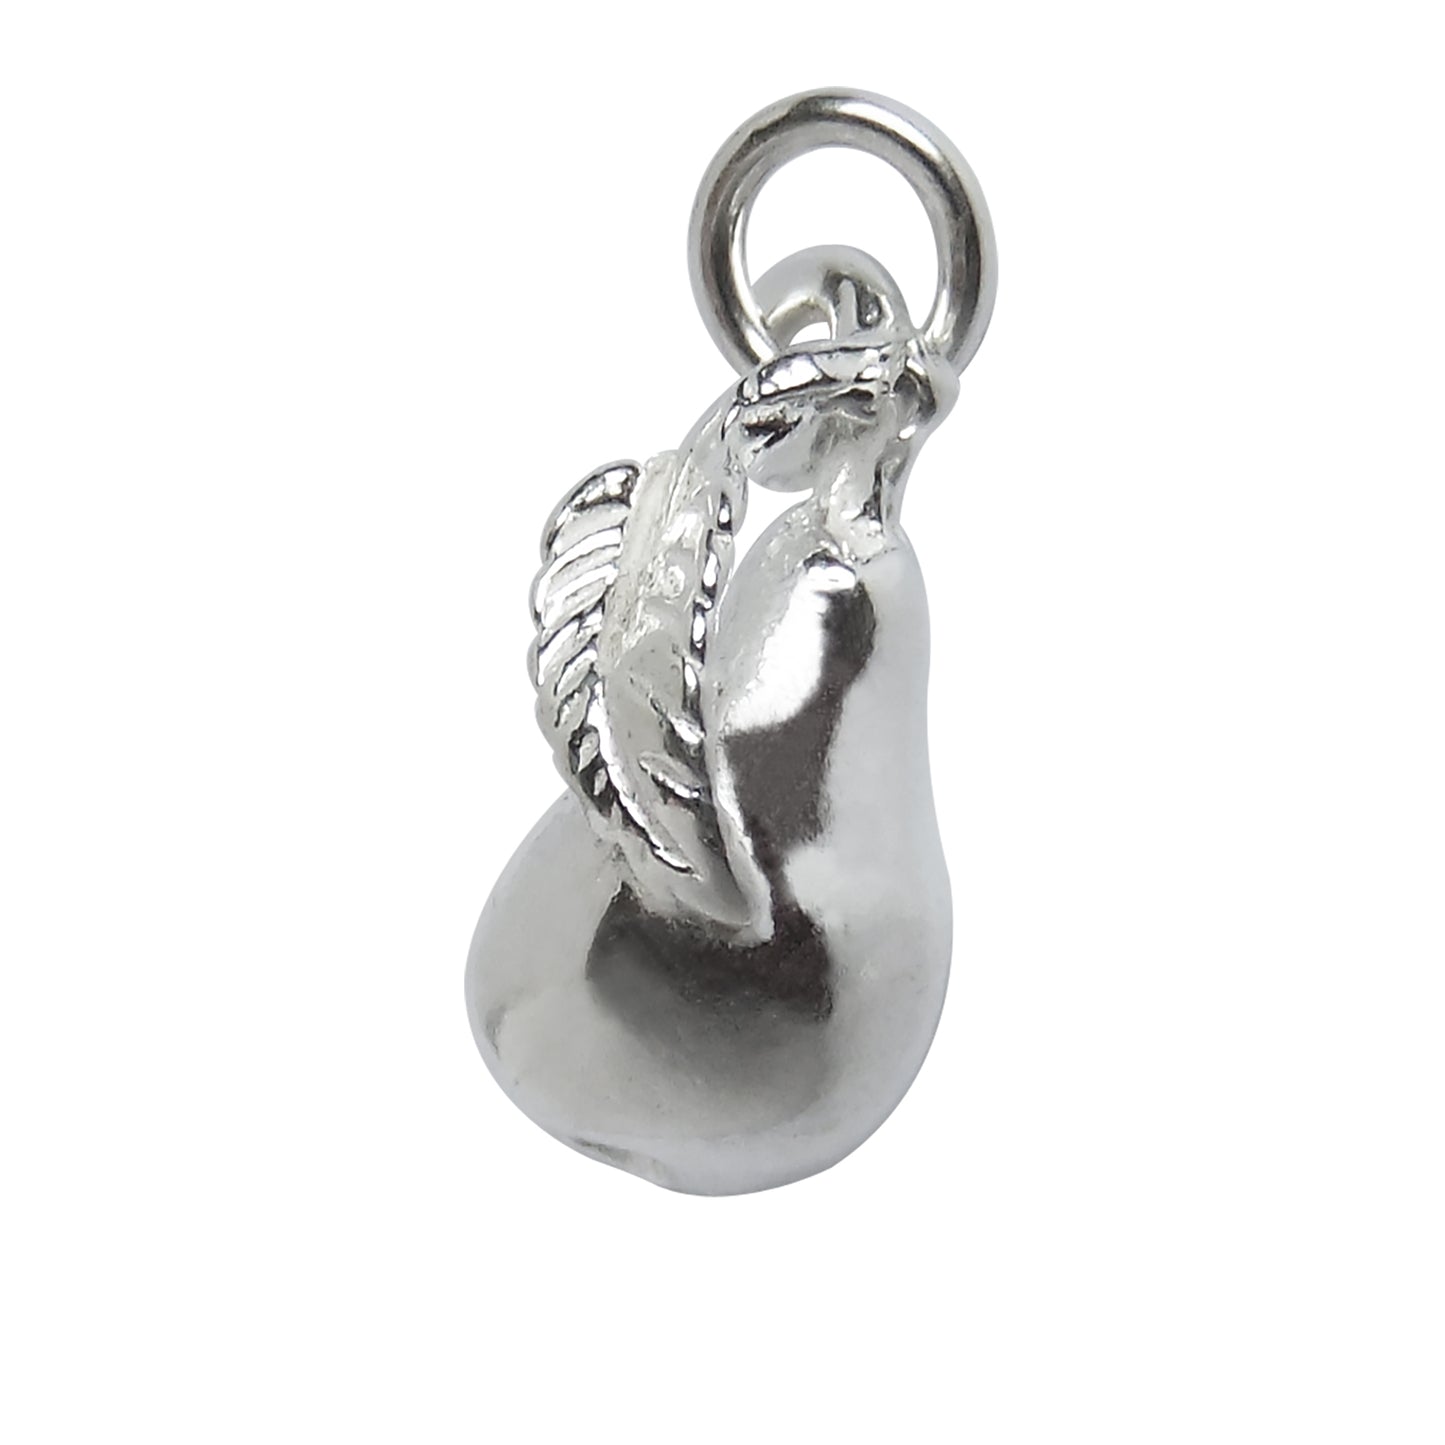 Pear Charm Sterling Silver Fruit Pendant from Charmarama